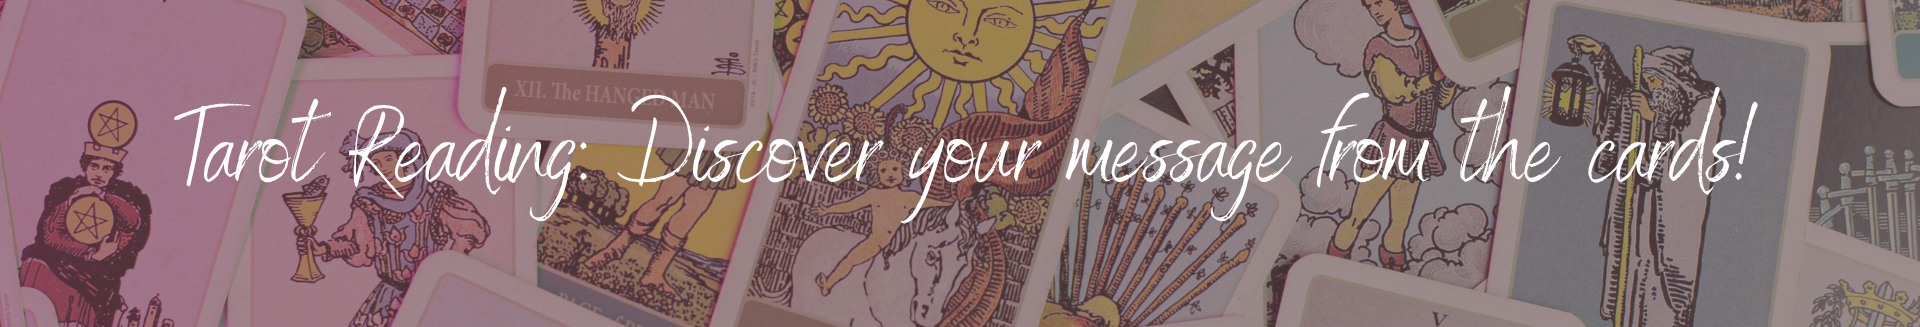 Tarot Reading: Discover your message from the cards!